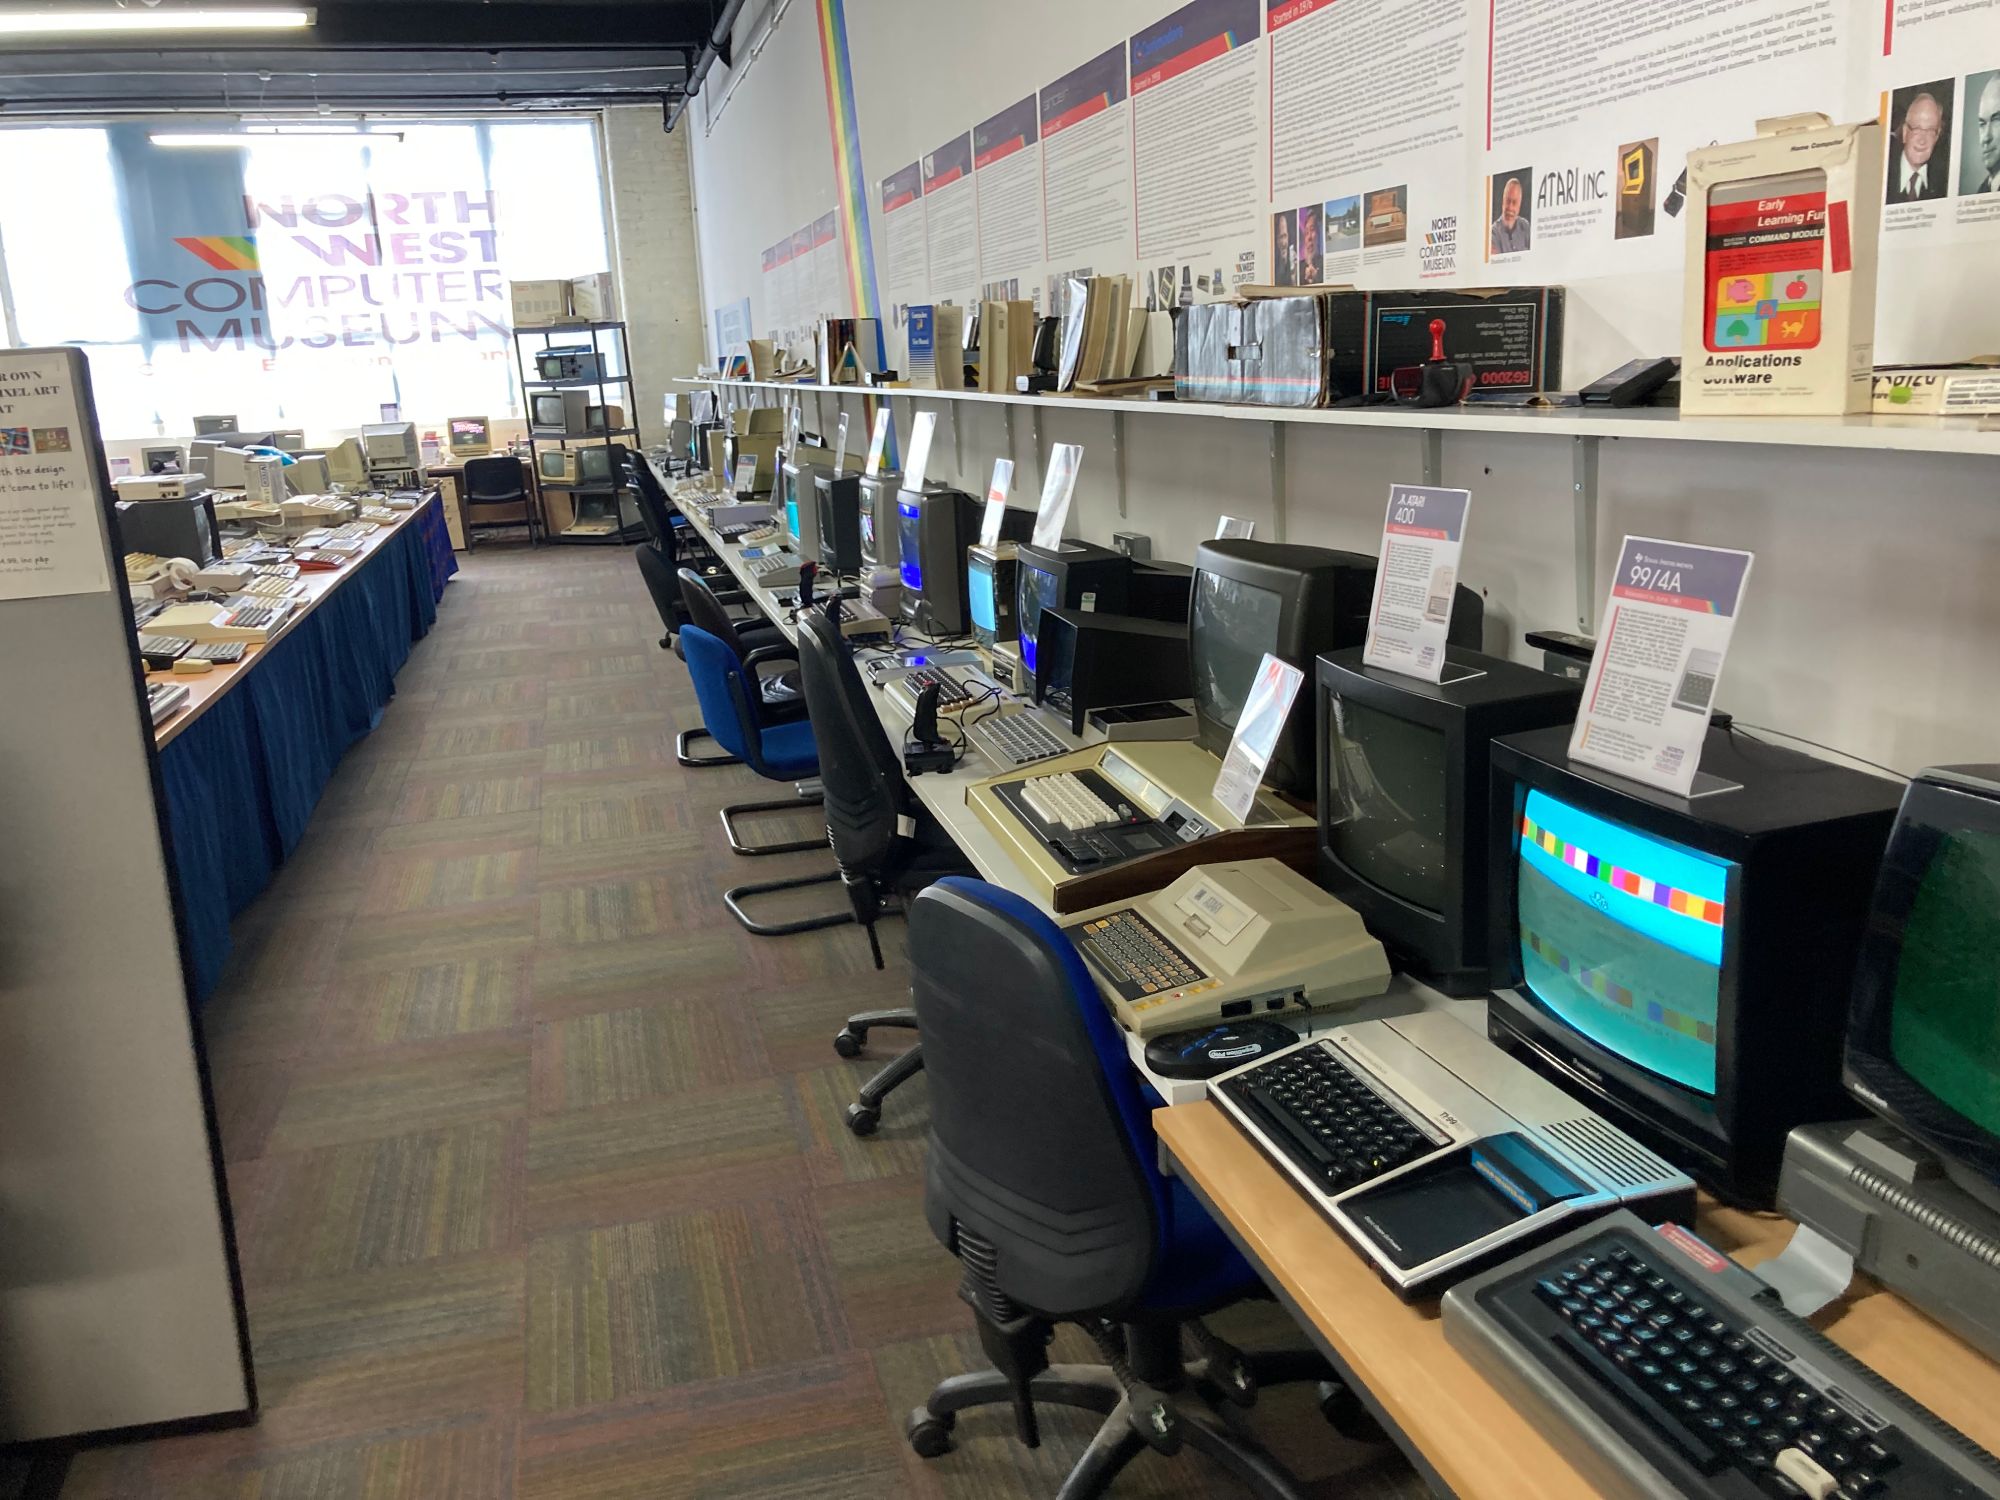 A bank of dozens of vintage computers, all switched on and hooked up to screens